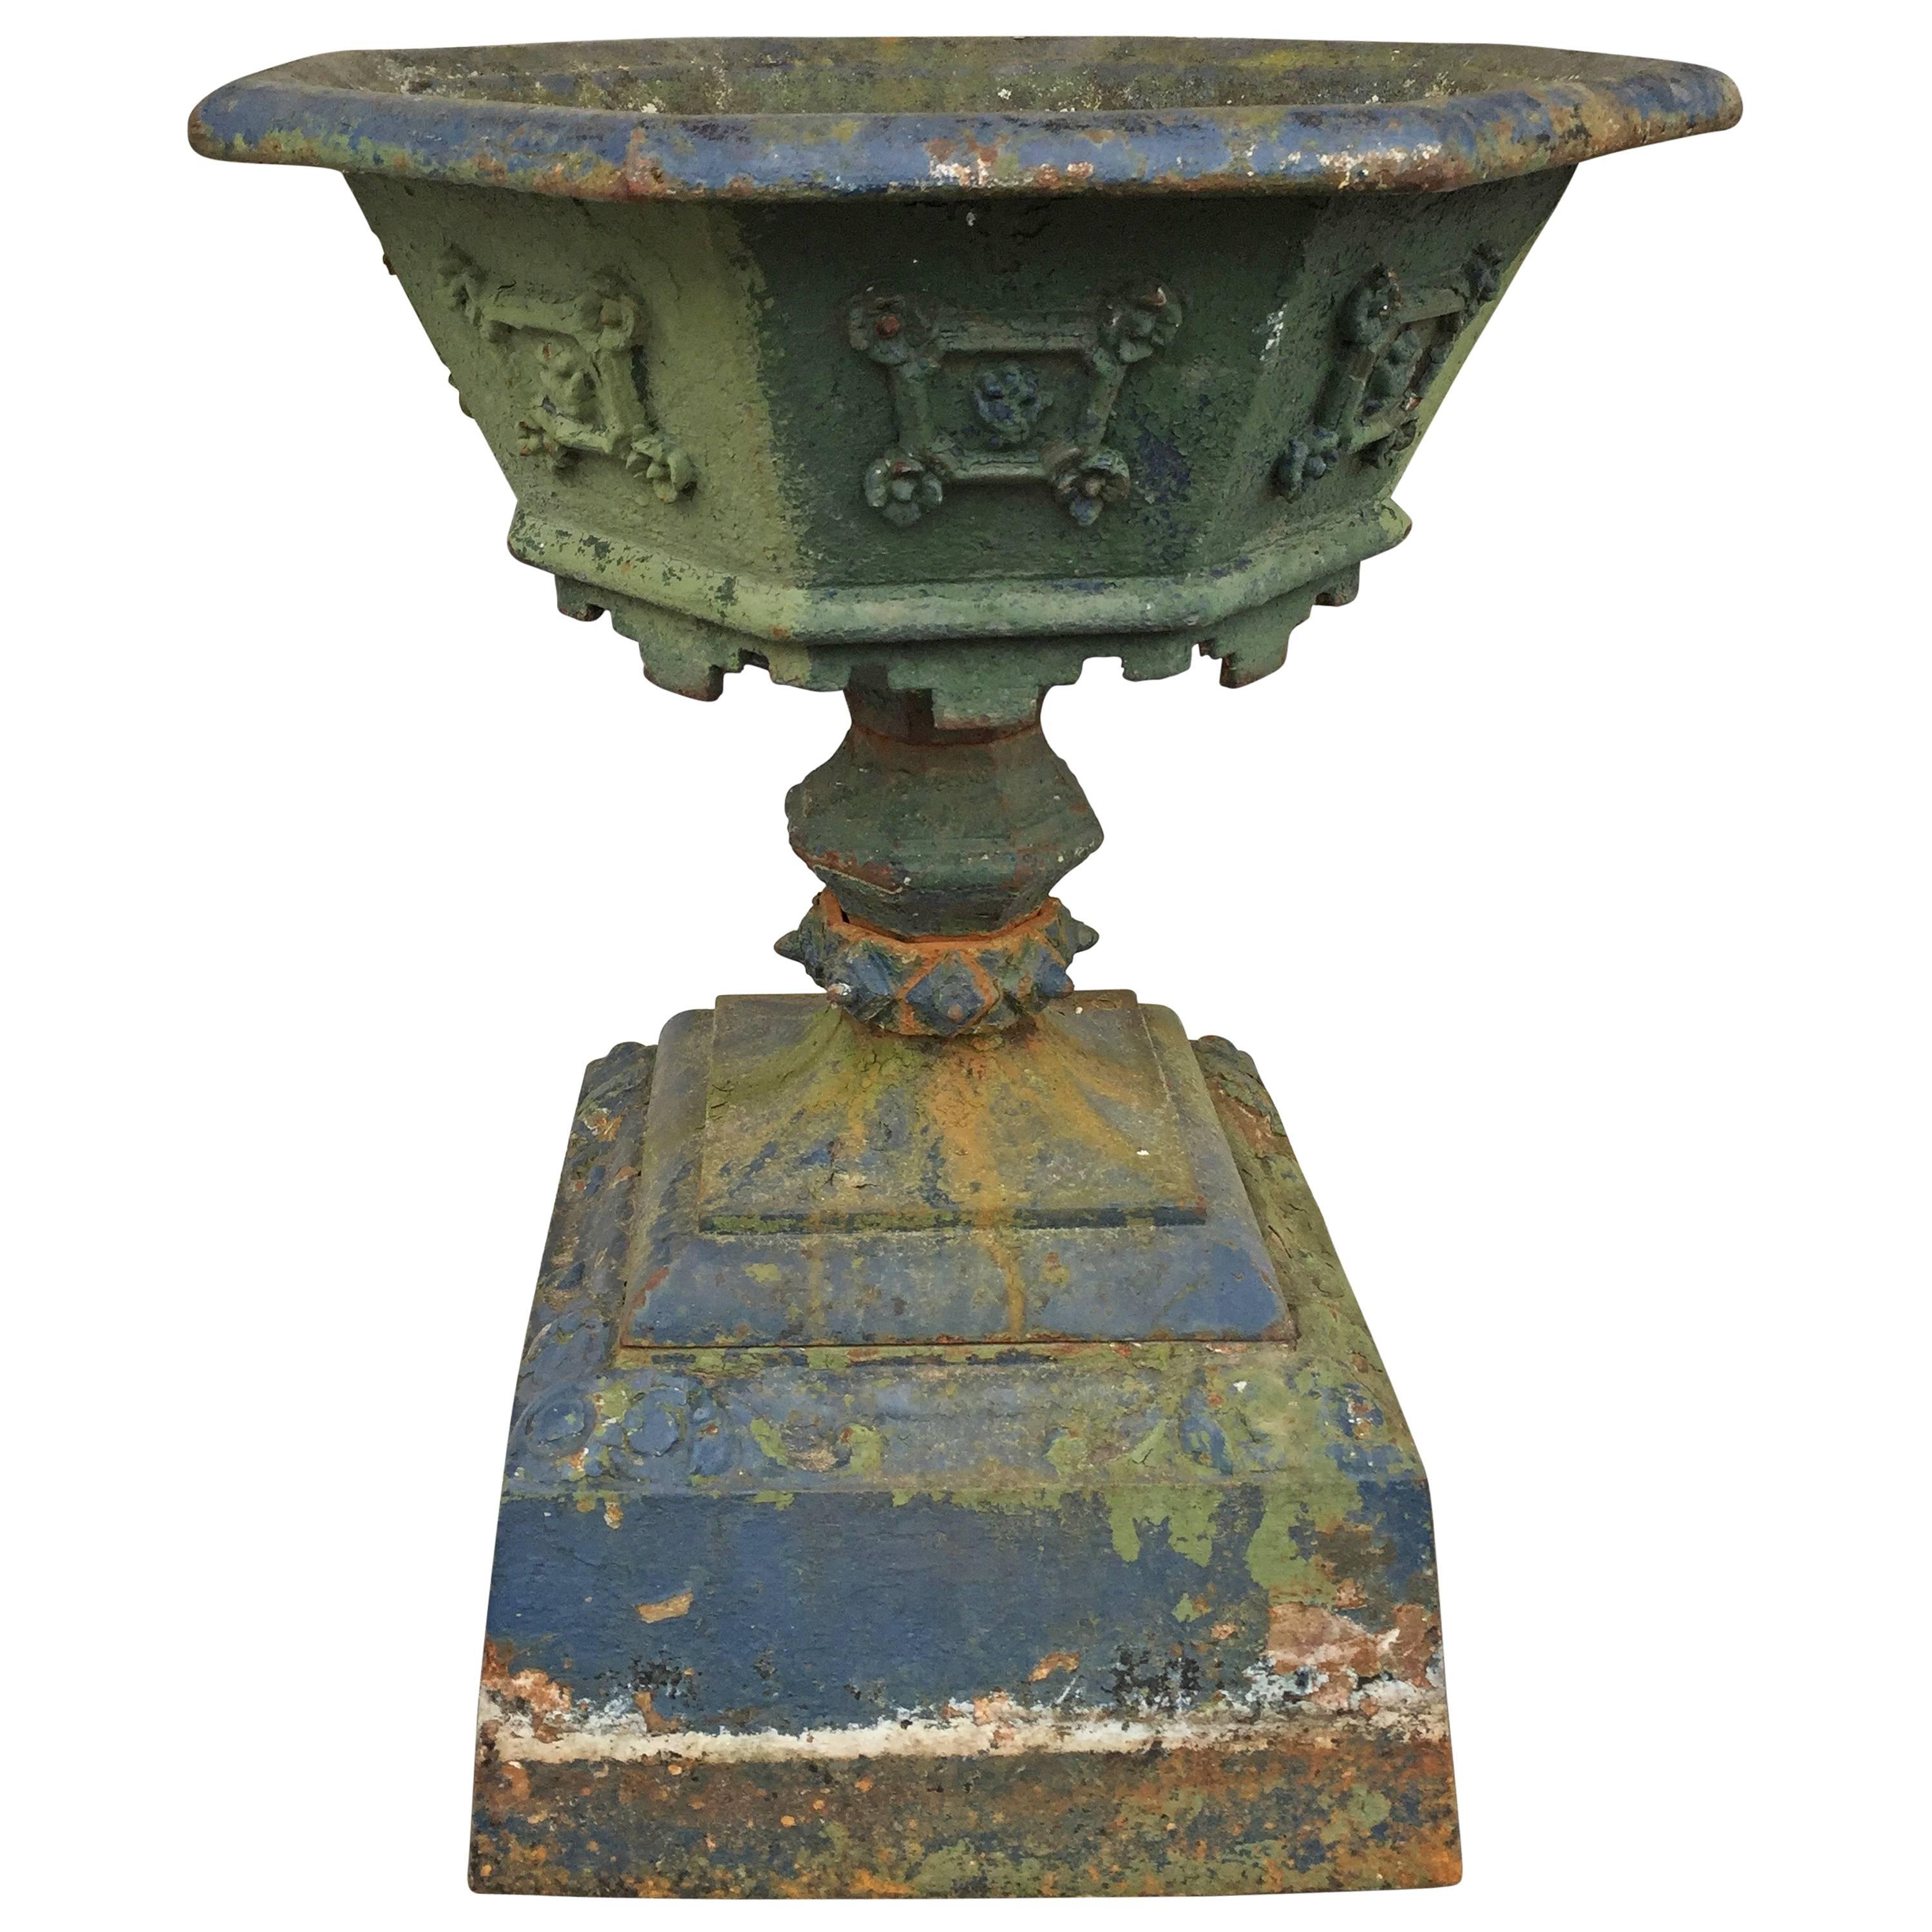 Single Cast Iron Urn with Octagonal Shape Top, Late 19th Century